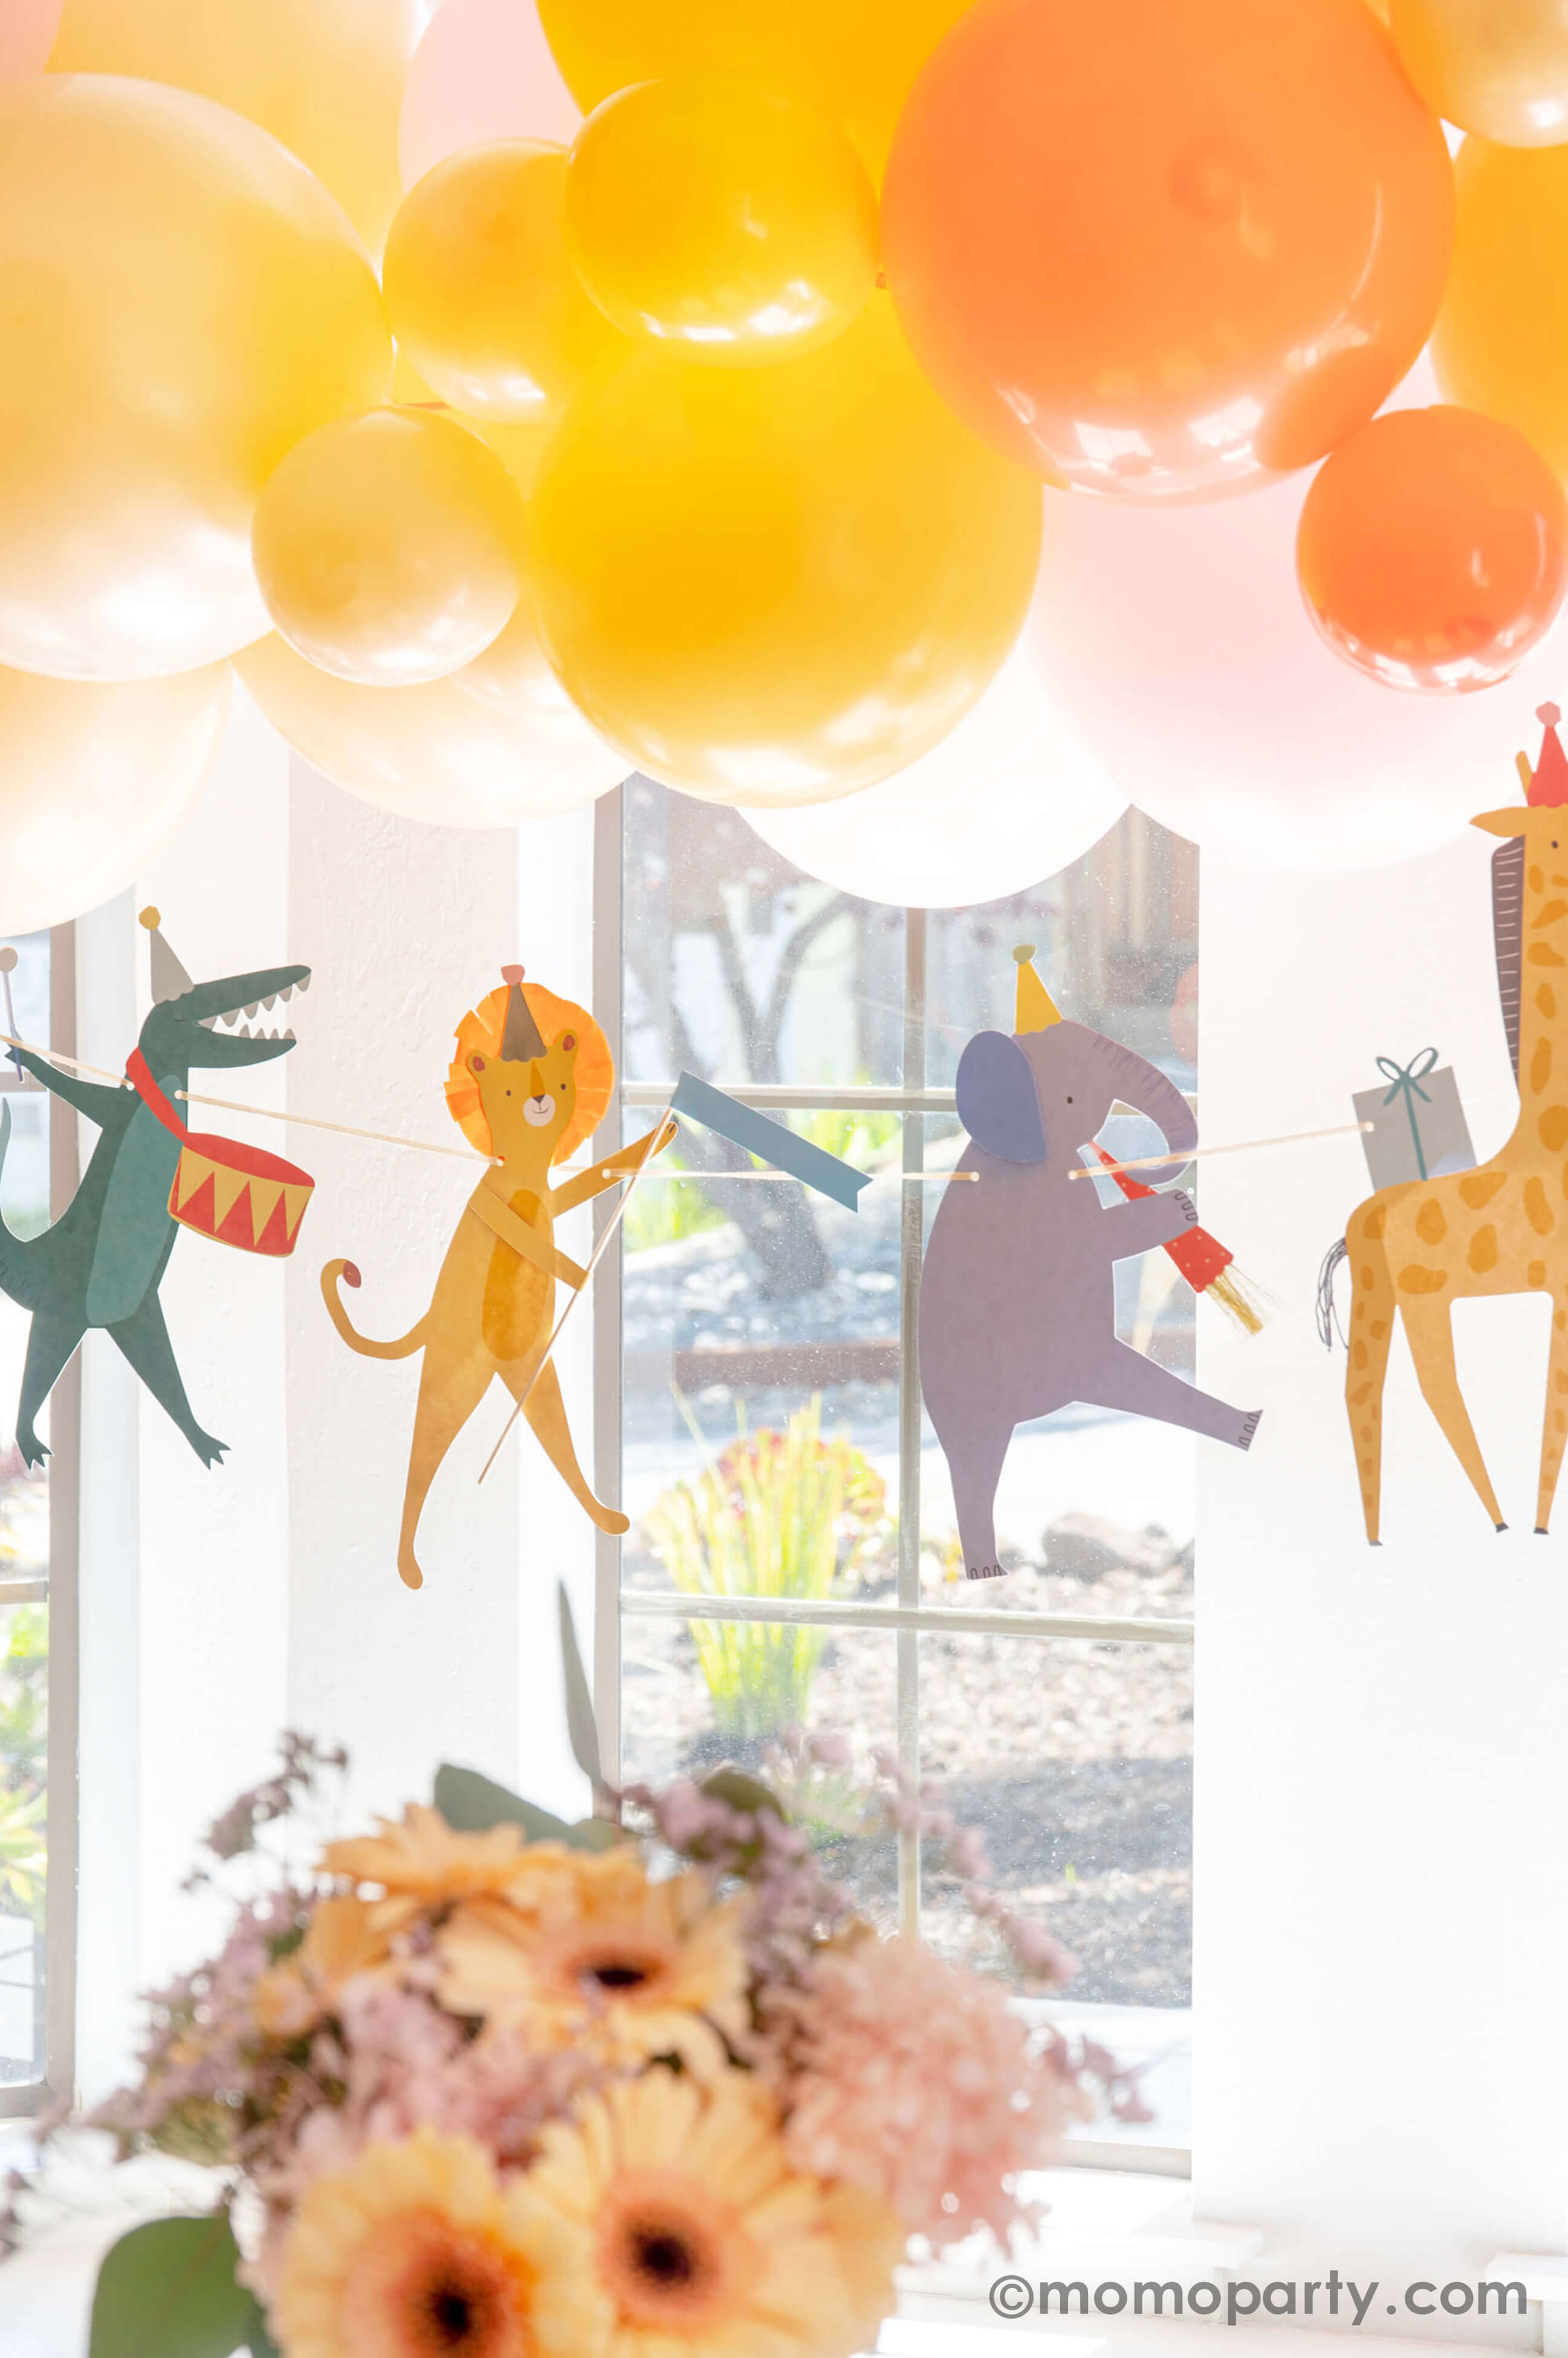 A kid's animal themed party decoration idea featuring Momo Party's adorable animal parade birthday garland featuring a lion, an elephant, an alligator, a giraffe, along with a festive balloon garland in a warm color tone in the back, it makes a great party inspiration for kid's animal, safari, carnival themed birthday party.